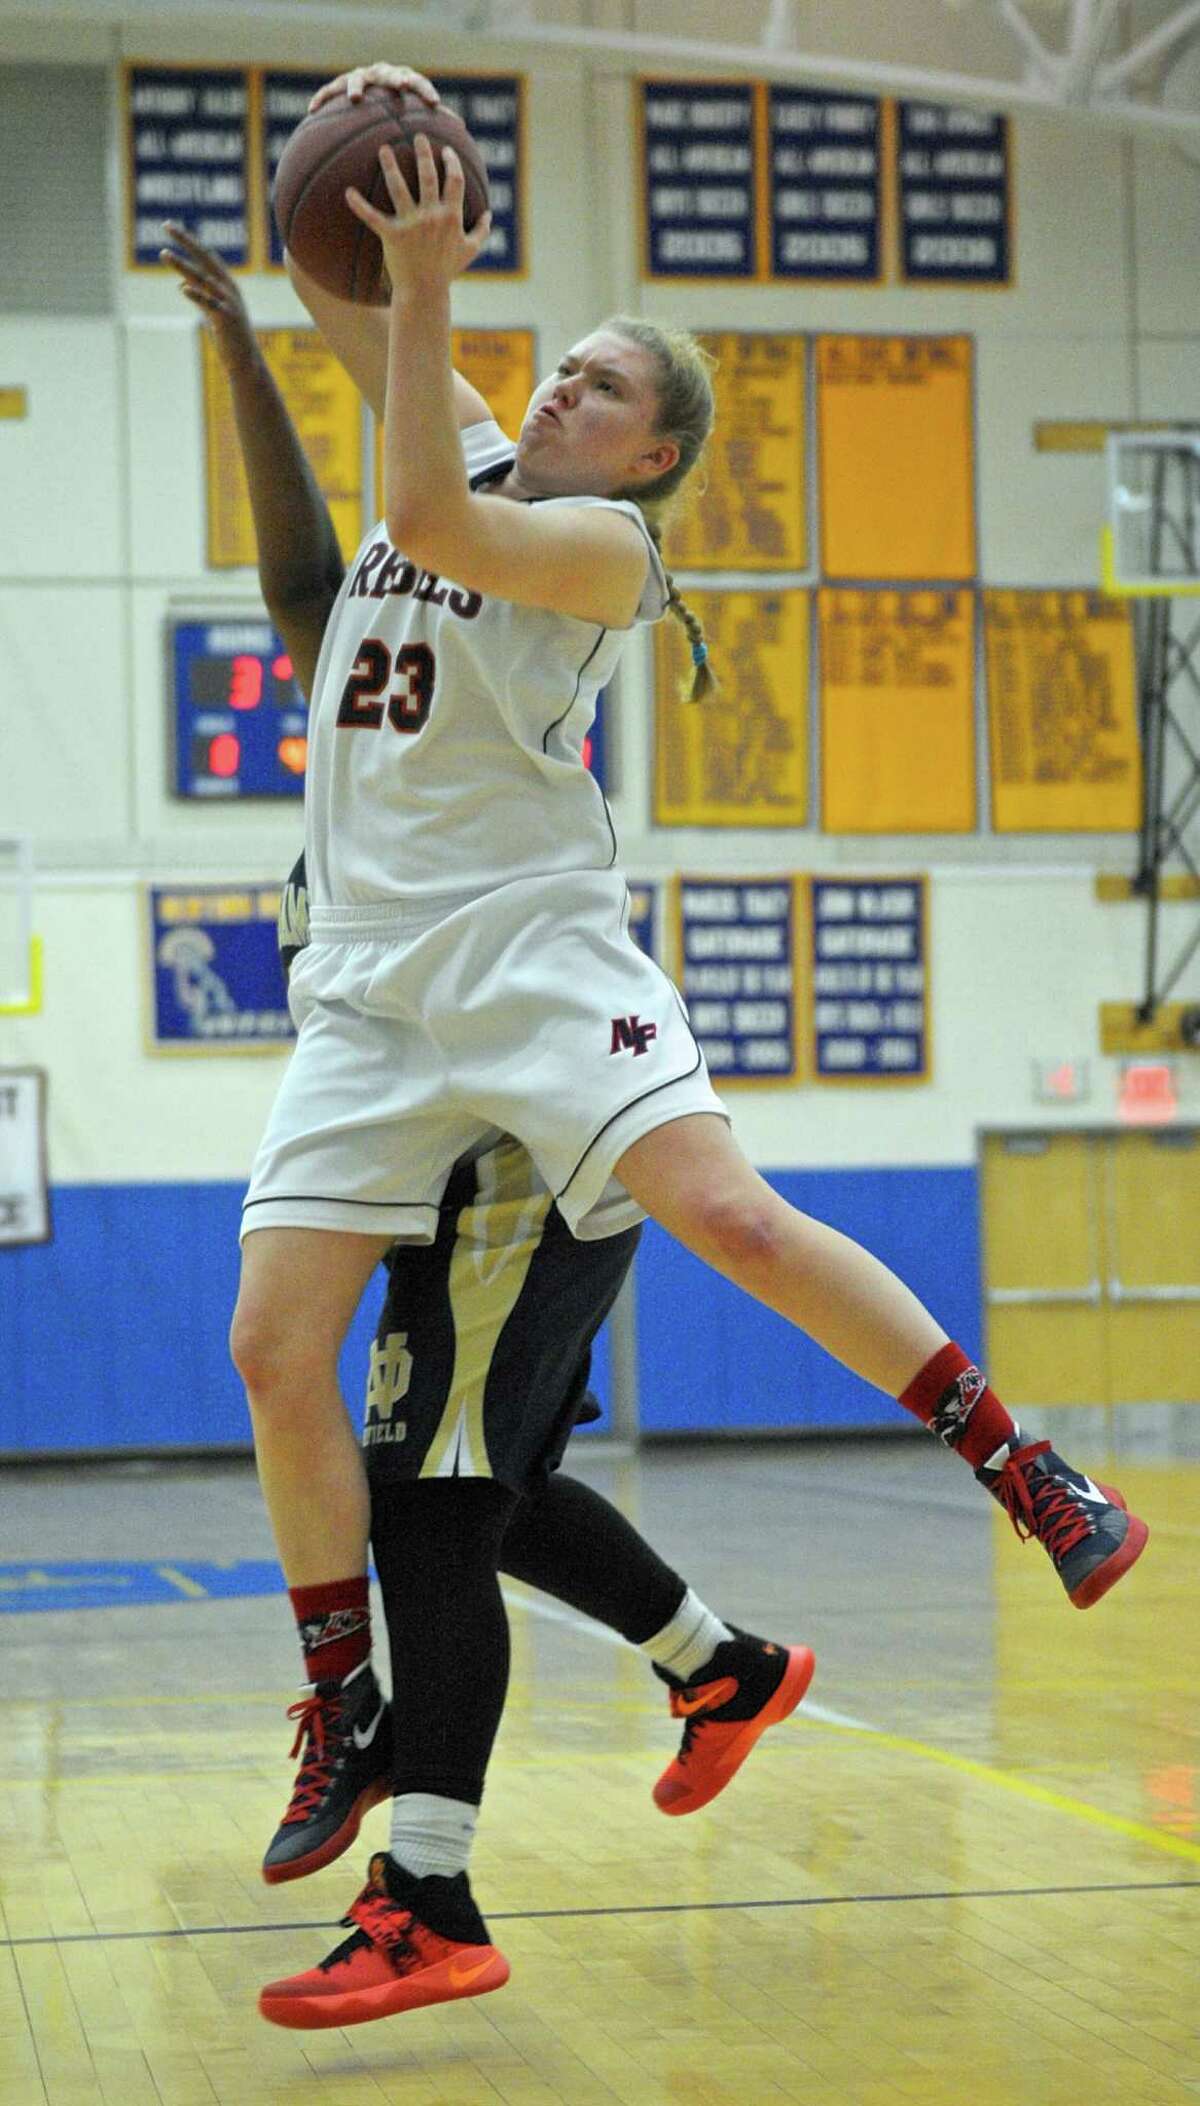 New Fairfield's Kristen Teklits (23) grabs a rebound from Notre Dame-Fairfield's Precious Montgomery in the SWC girls high school championship game between Notre Dame-Fairfield and New Fairfield high school, on Wednesday night, February 24, 2016, at New Town High School, Newtown, Conn.